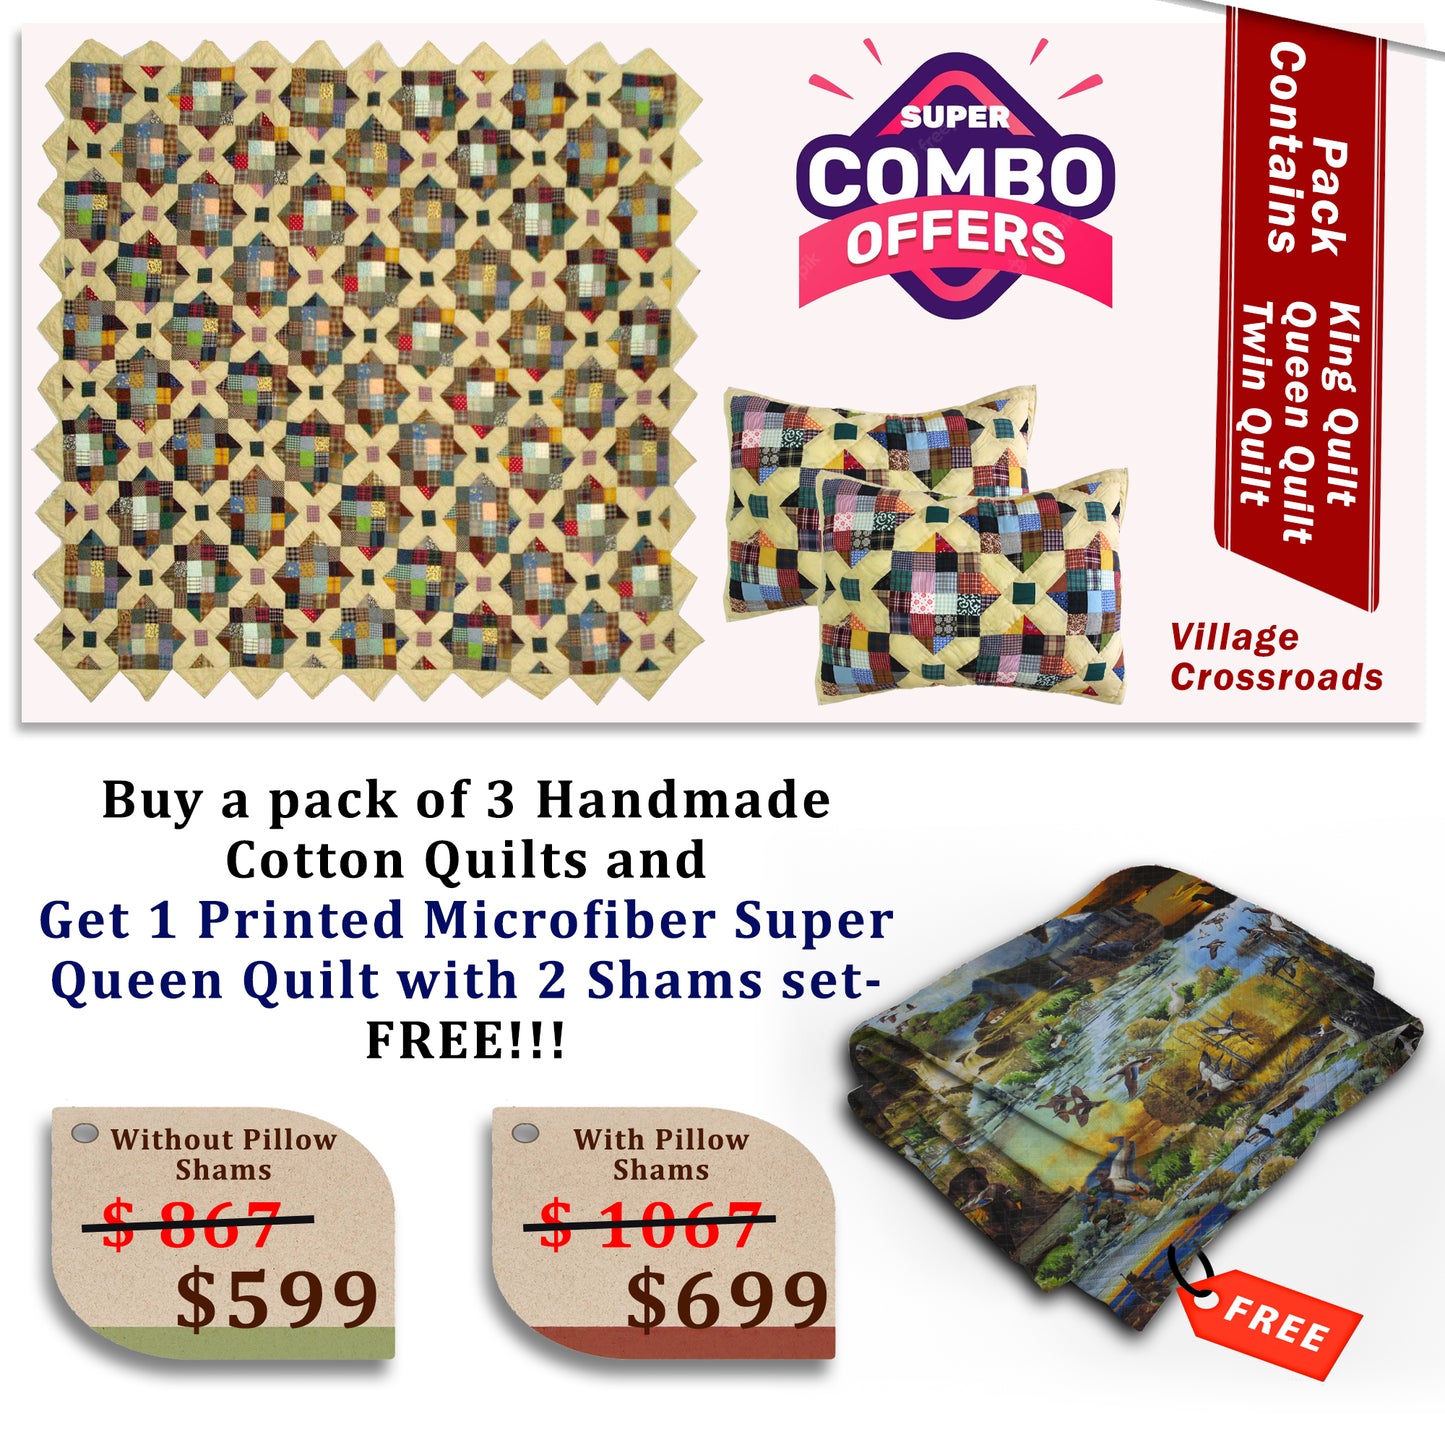 Village Crossroads - Handmade Cotton quilts | Matching pillow shams | Buy 3 cotton quilts and get 1 Printed Microfiber Super Queen Quilt with 2 Shams set FREE